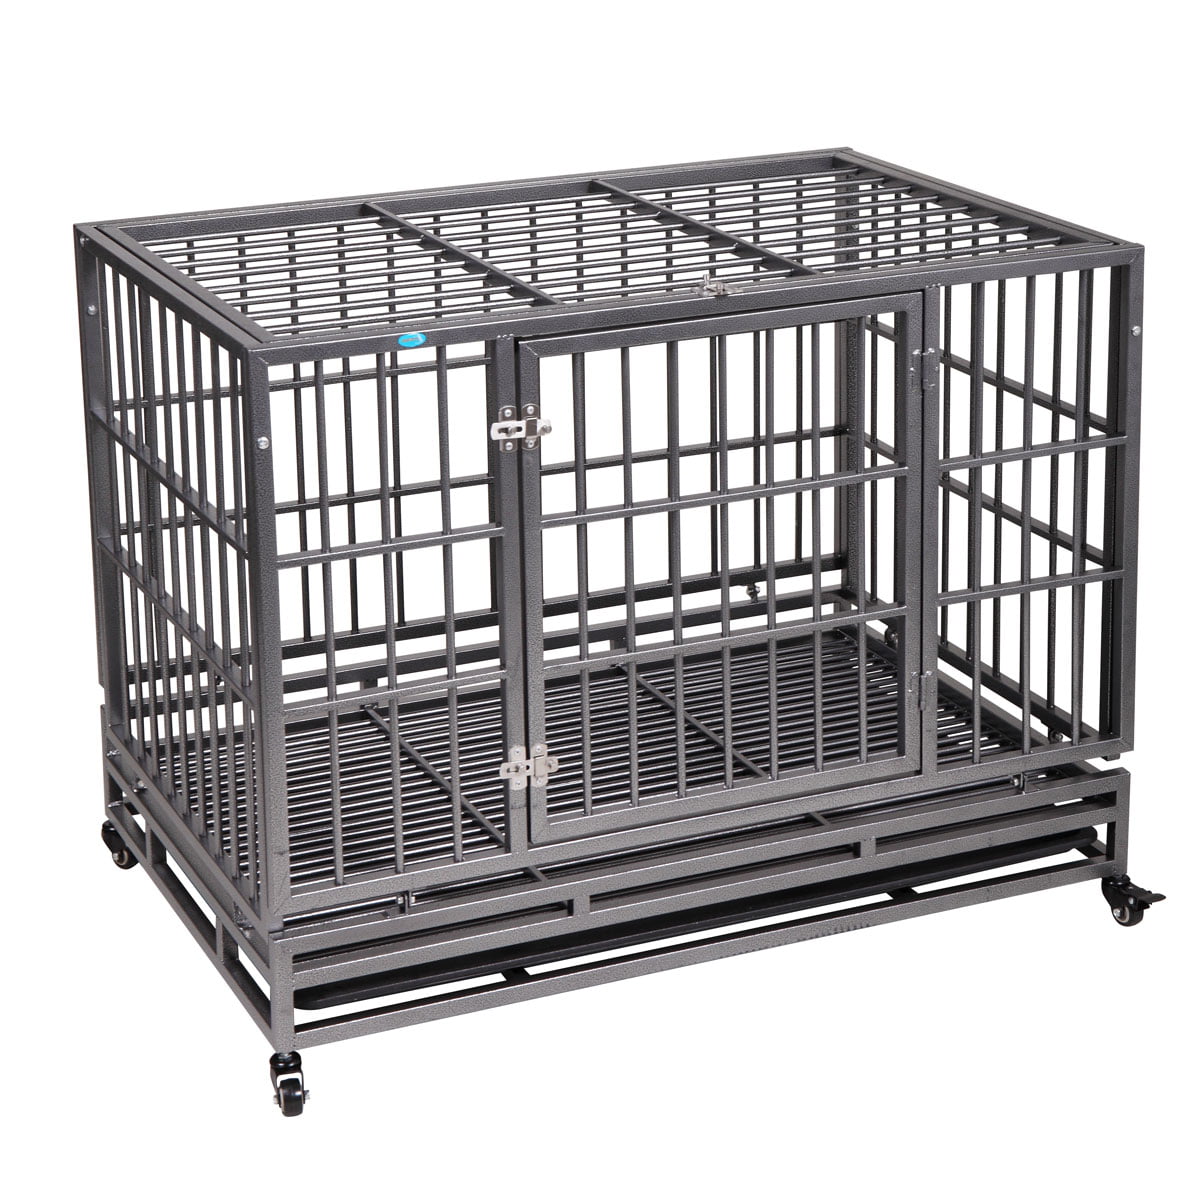 Double Doors Inside/Outside 4 Lockable Wheels Safe Metal Tray COZIWOW Heavy-Duty Large Dog Pets Kennel Cage Crate Black,32.6 H